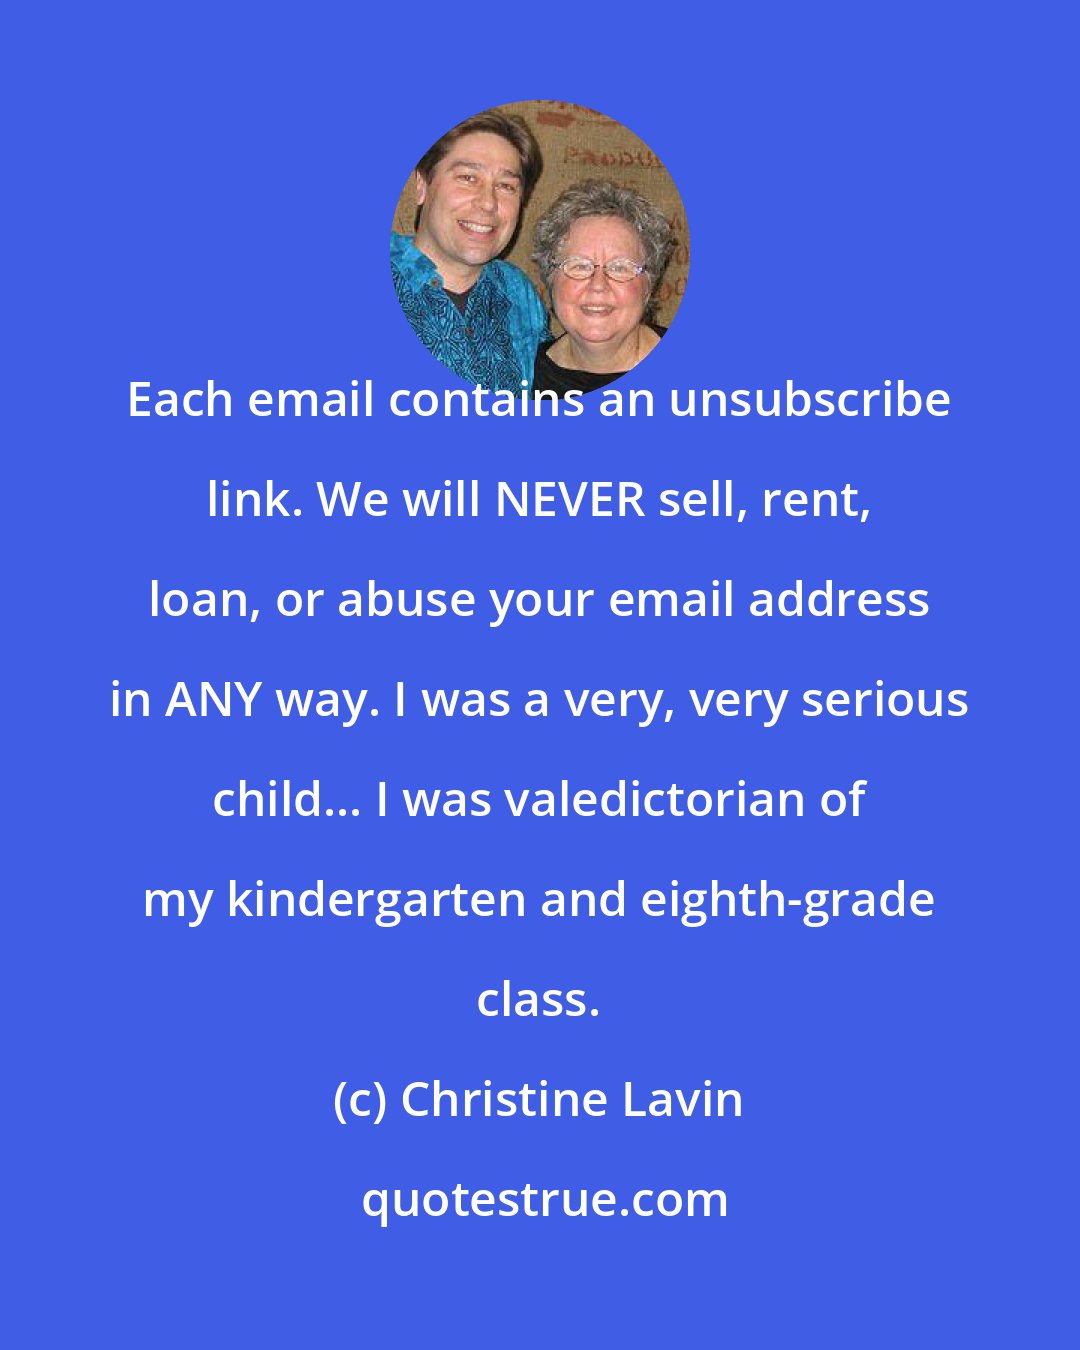 Christine Lavin: Each email contains an unsubscribe link. We will NEVER sell, rent, loan, or abuse your email address in ANY way. I was a very, very serious child... I was valedictorian of my kindergarten and eighth-grade class.